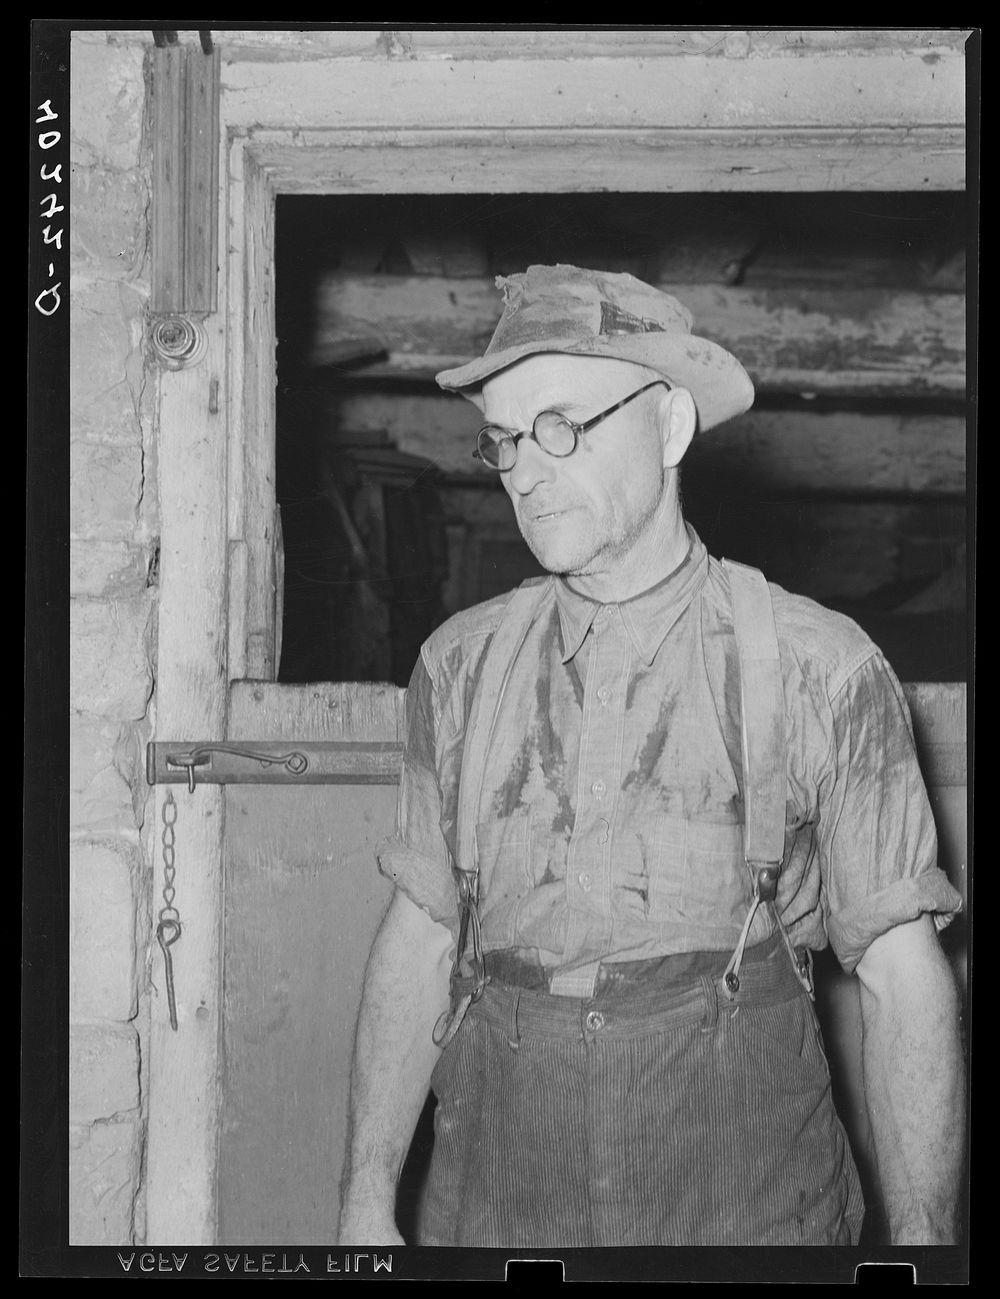 Lancaster County, Pennsylvania. Enos Royer having an altercation with a poultry buyer on the Enos Royer farm. Sourced from…